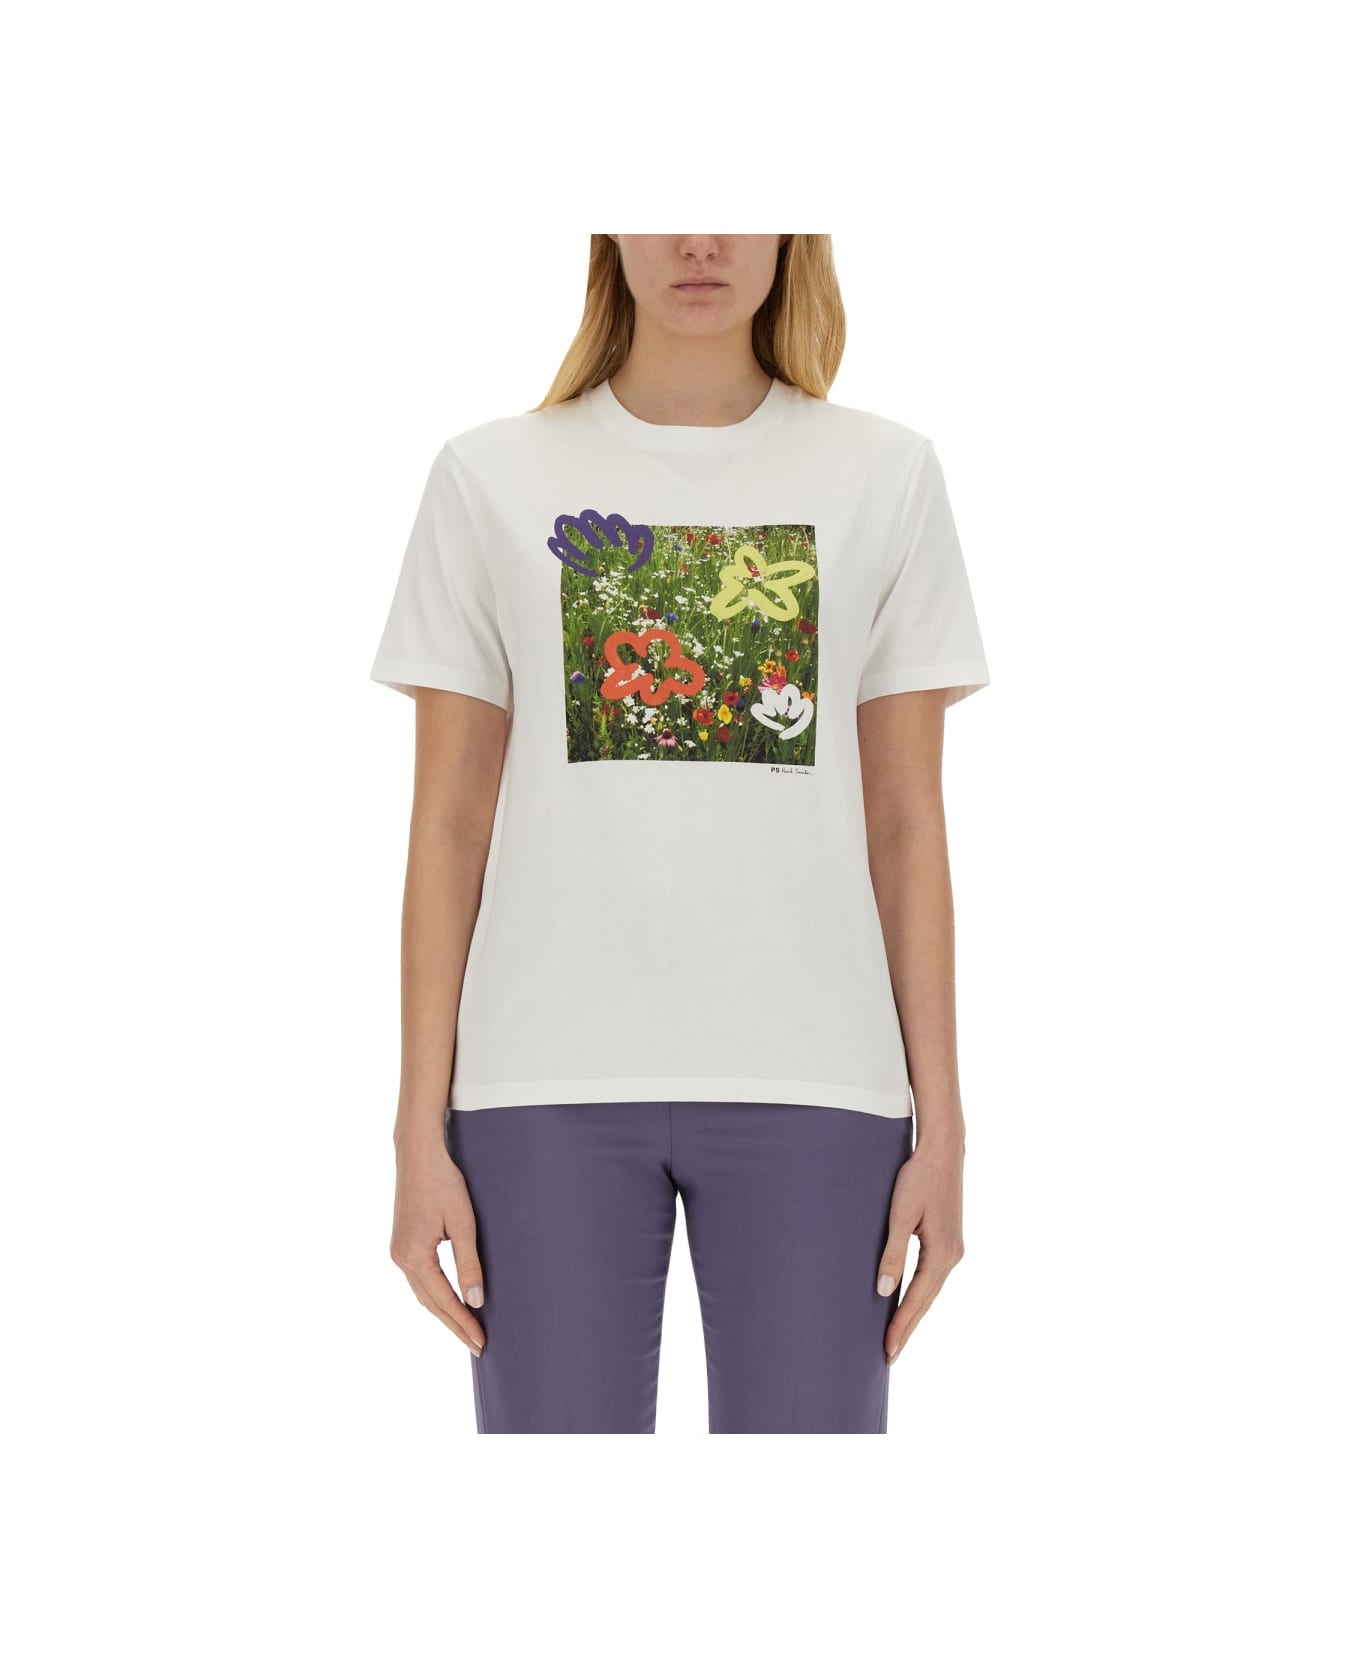 PS by Paul Smith "wildflowers" T-shirt - WHITE